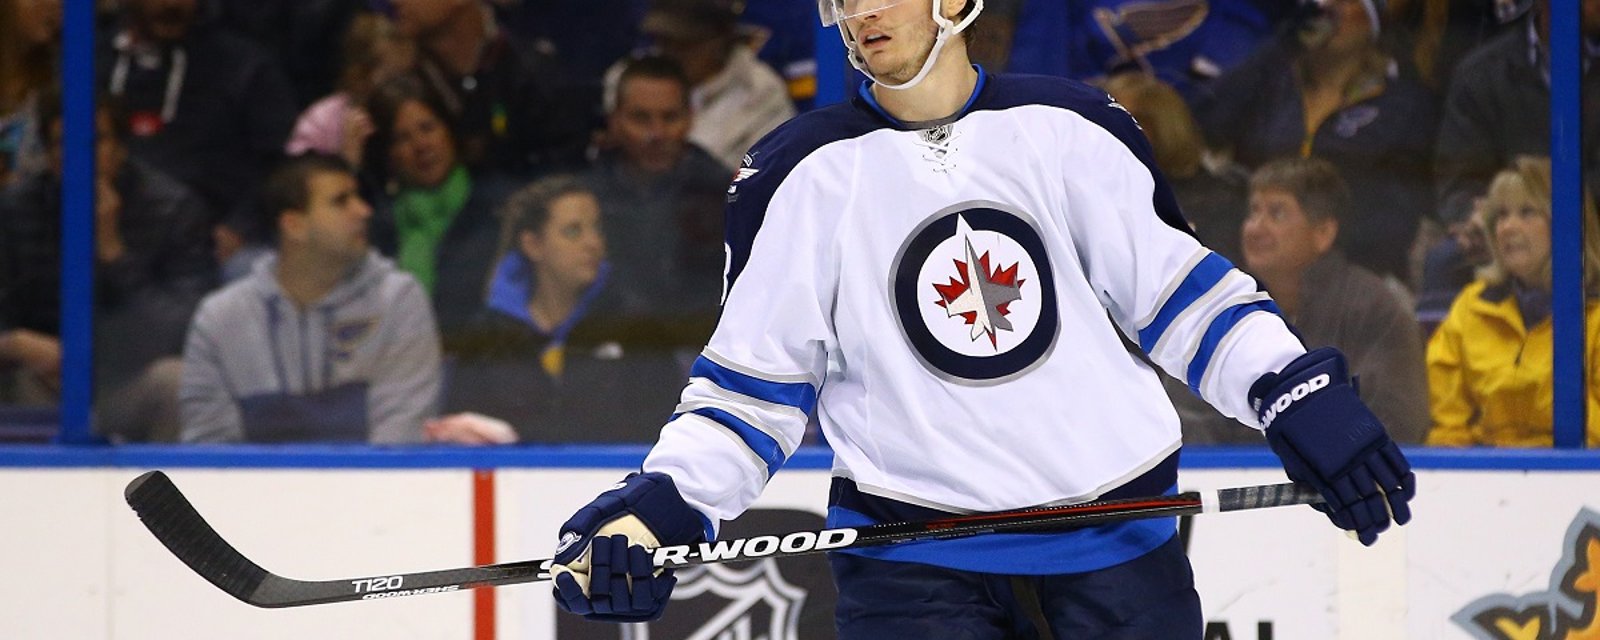 Two potential favorites to acquire defenseman Jacob Trouba in a trade.